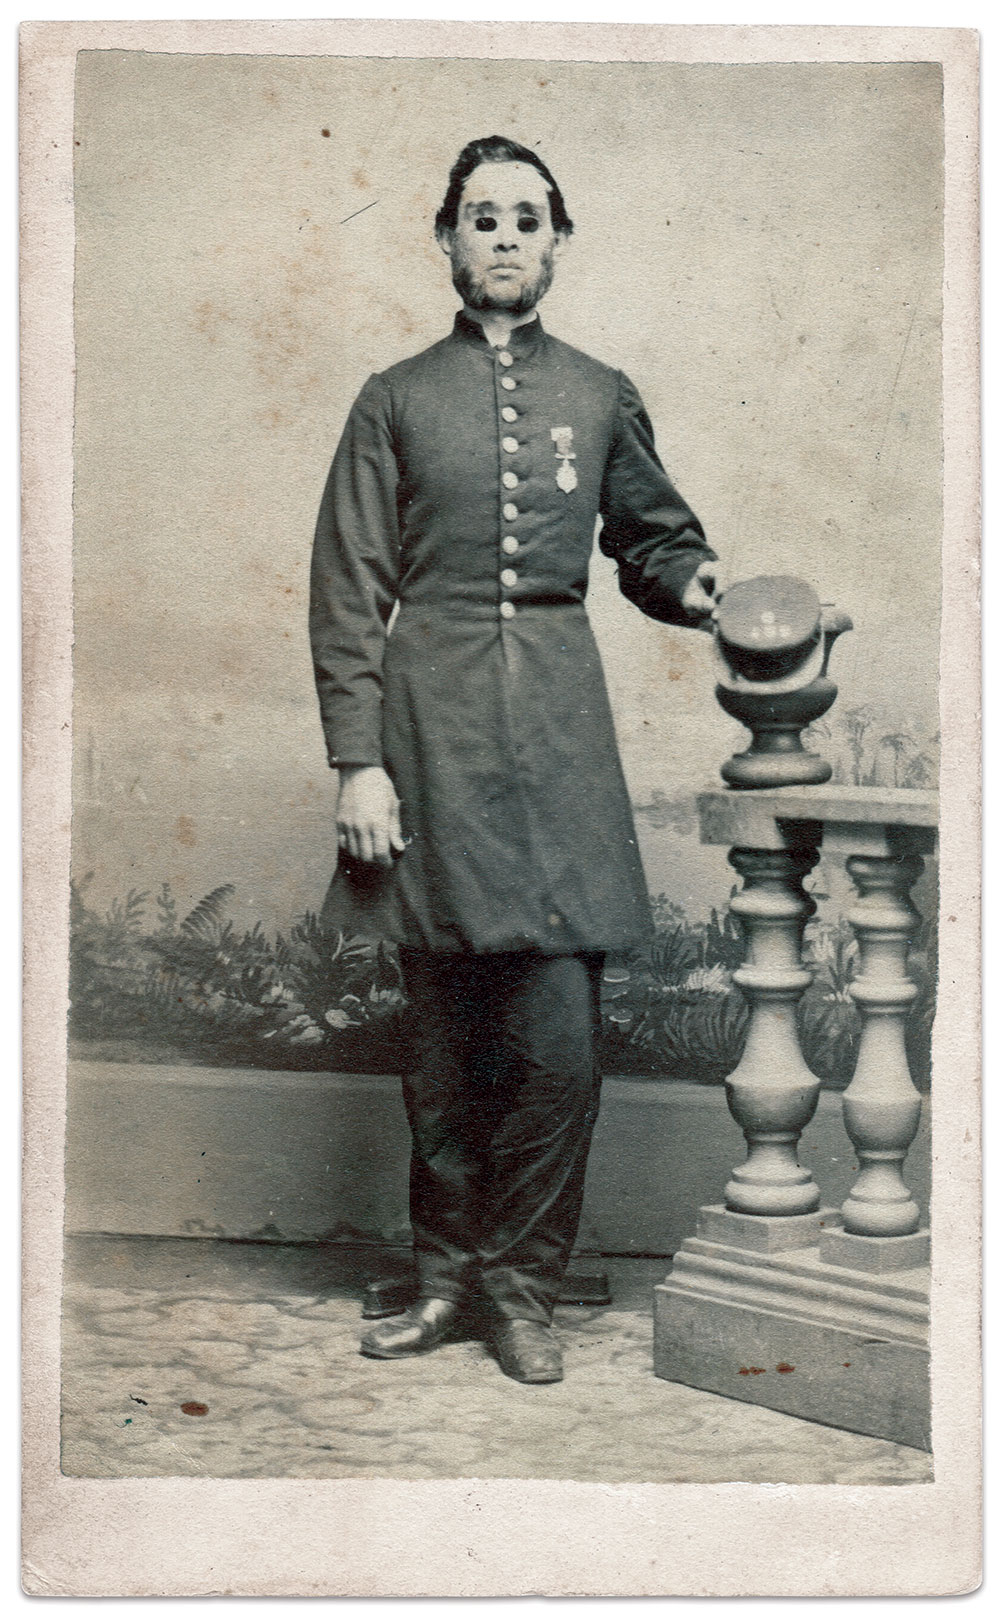 Private David Henry Wintress (1844-1908), 139th New York Infantry, circa 1866. He suffered a gunshot wound in the April 12, 1863, Battle of Williamsburg, Va., that took both eyes. Carte de visite by an unidentified photographer. 